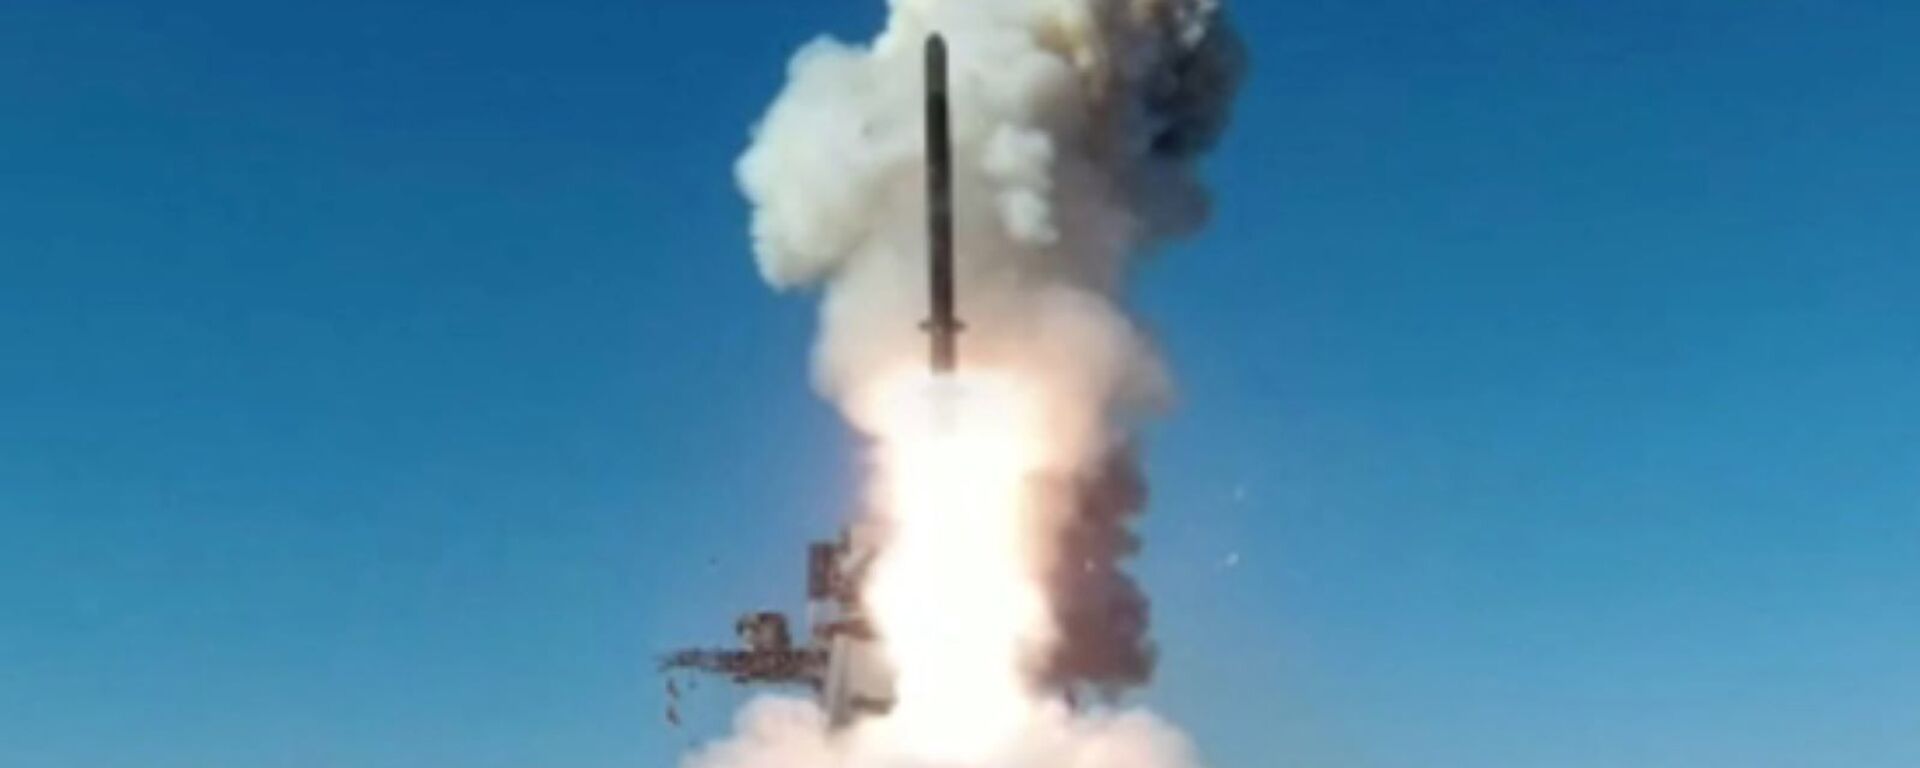 A modernized frigate from the Russian Pacific Fleet, the Marshal Shaposhnikov, carries out the first test of the Kalibr cruise missile in the Sea of Japan, 6 April, 2021 - Sputnik India, 1920, 25.04.2023